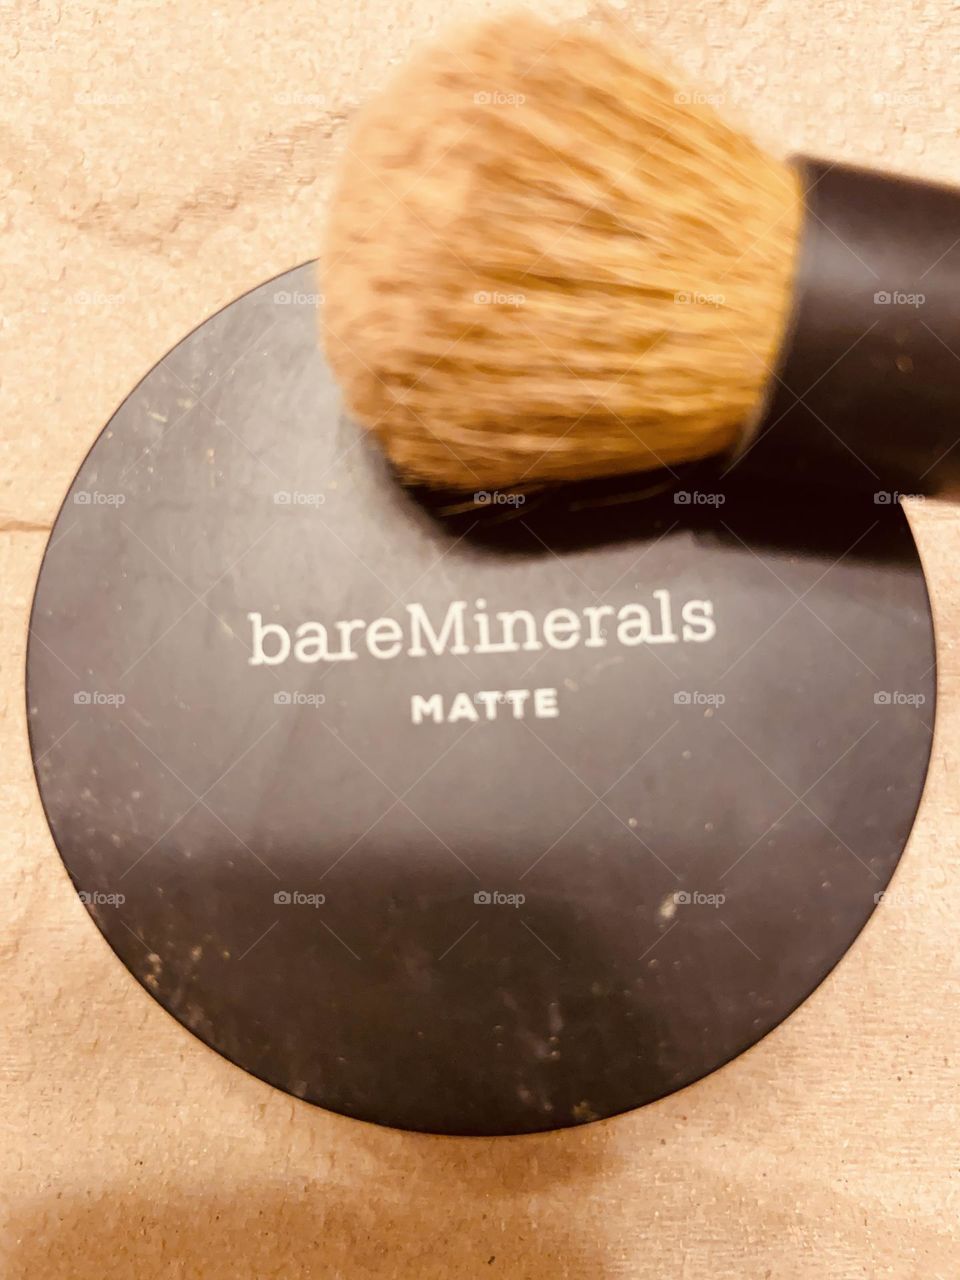 Bare Minerals Matte Foundation with Mini Brush. I always gravitate back to this foundation. It looks like just skin on, not like you are wearing makeup, and evens out my complexion. Some say you should not use powder as you get older, but I still do.